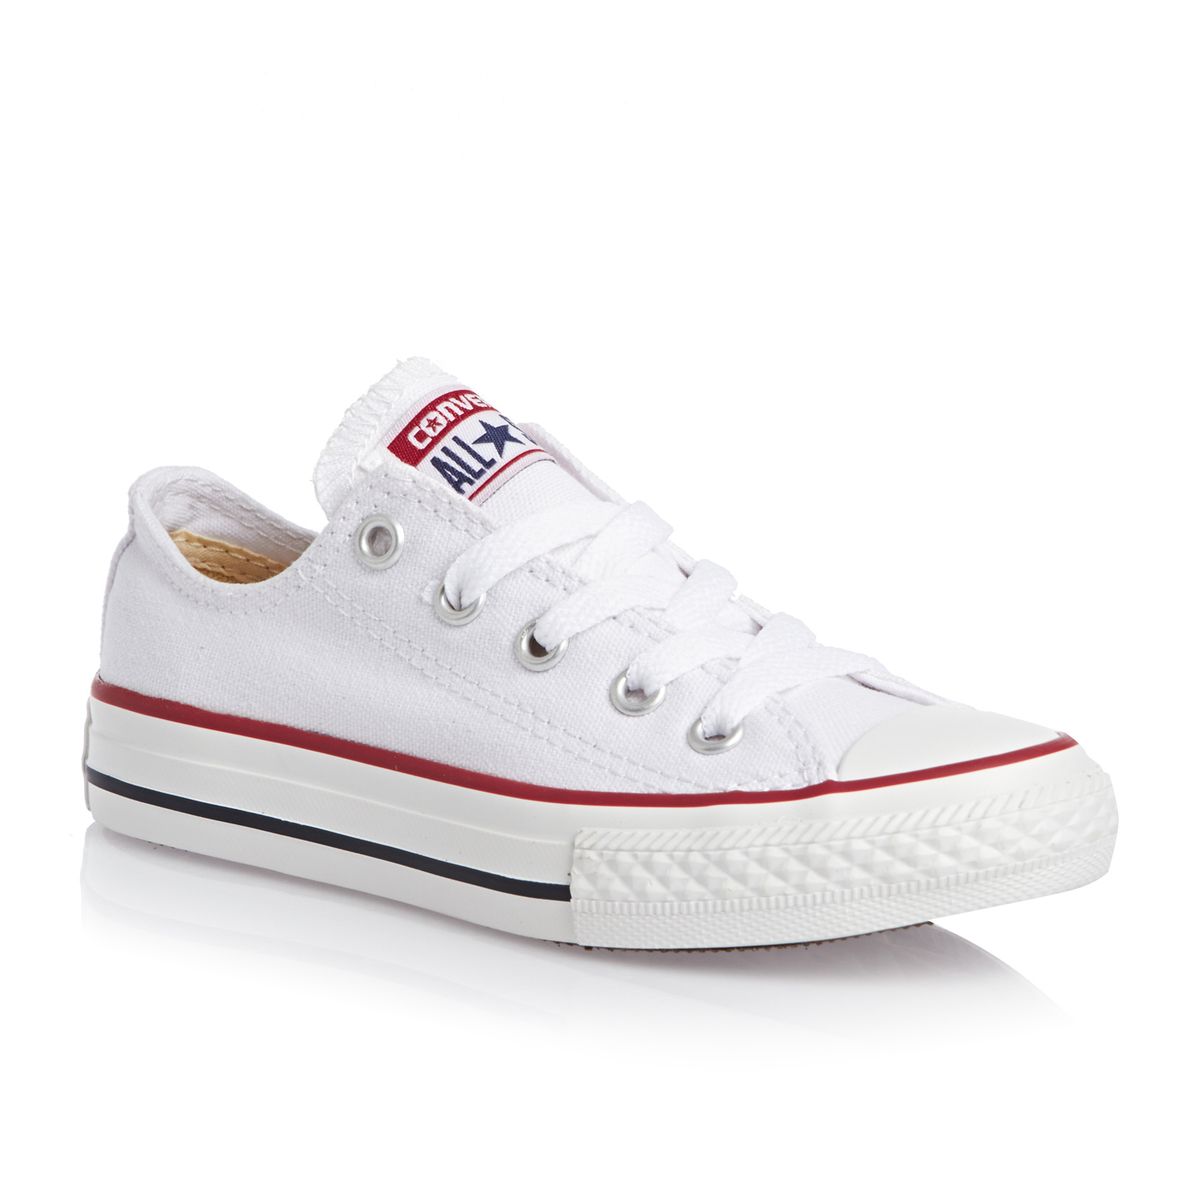 converse white with red line Online 